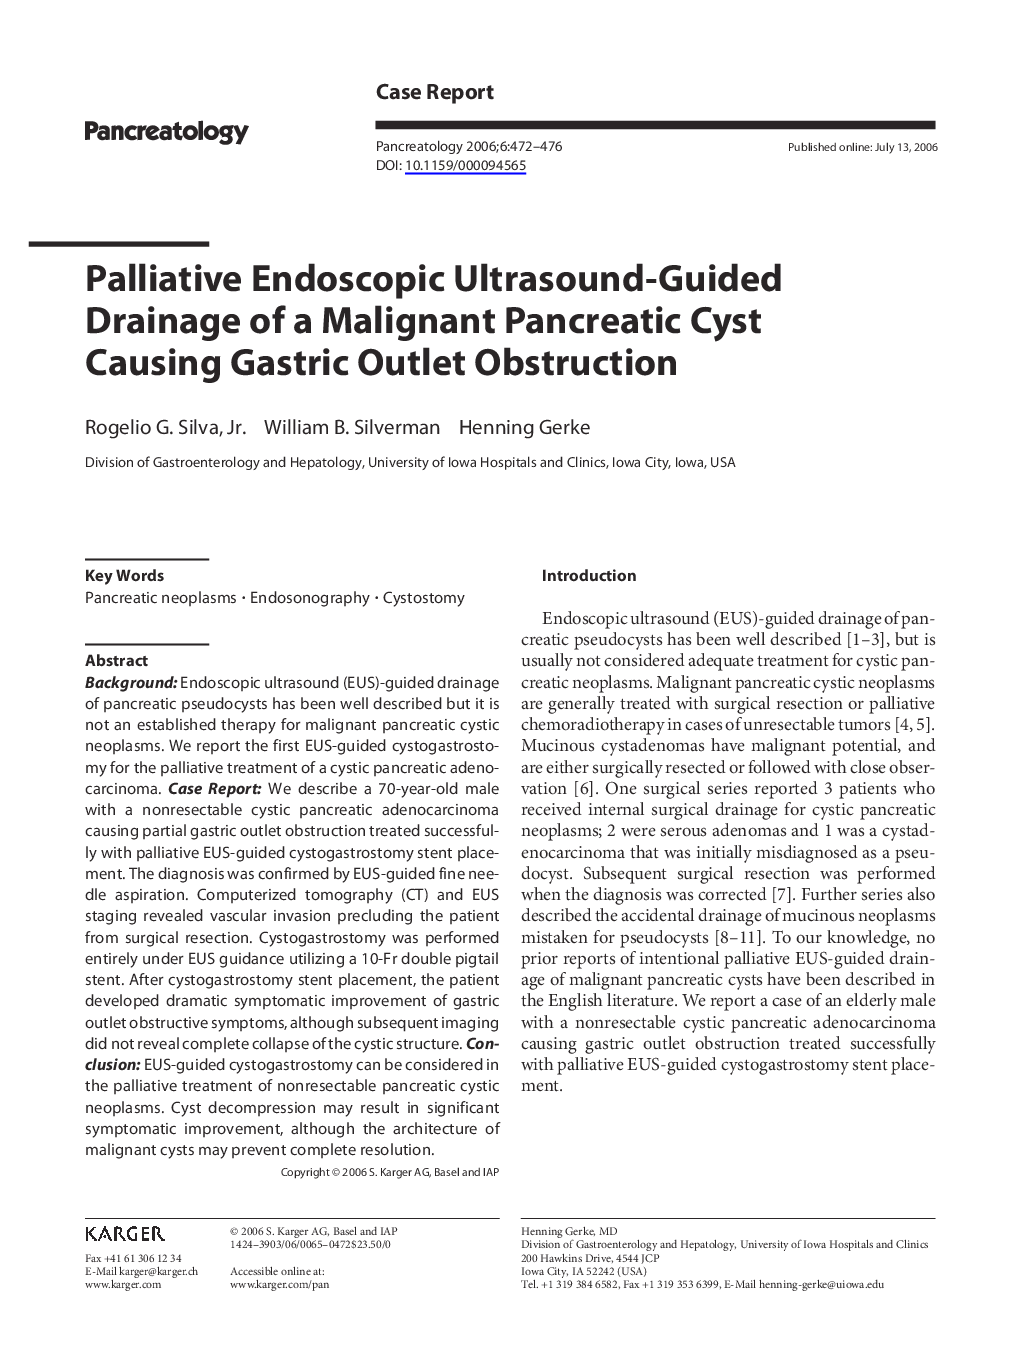 Palliative endoscopic ultrasound-guided drainage of a malignant pancreatic cyst causing gastric outlet obstruction